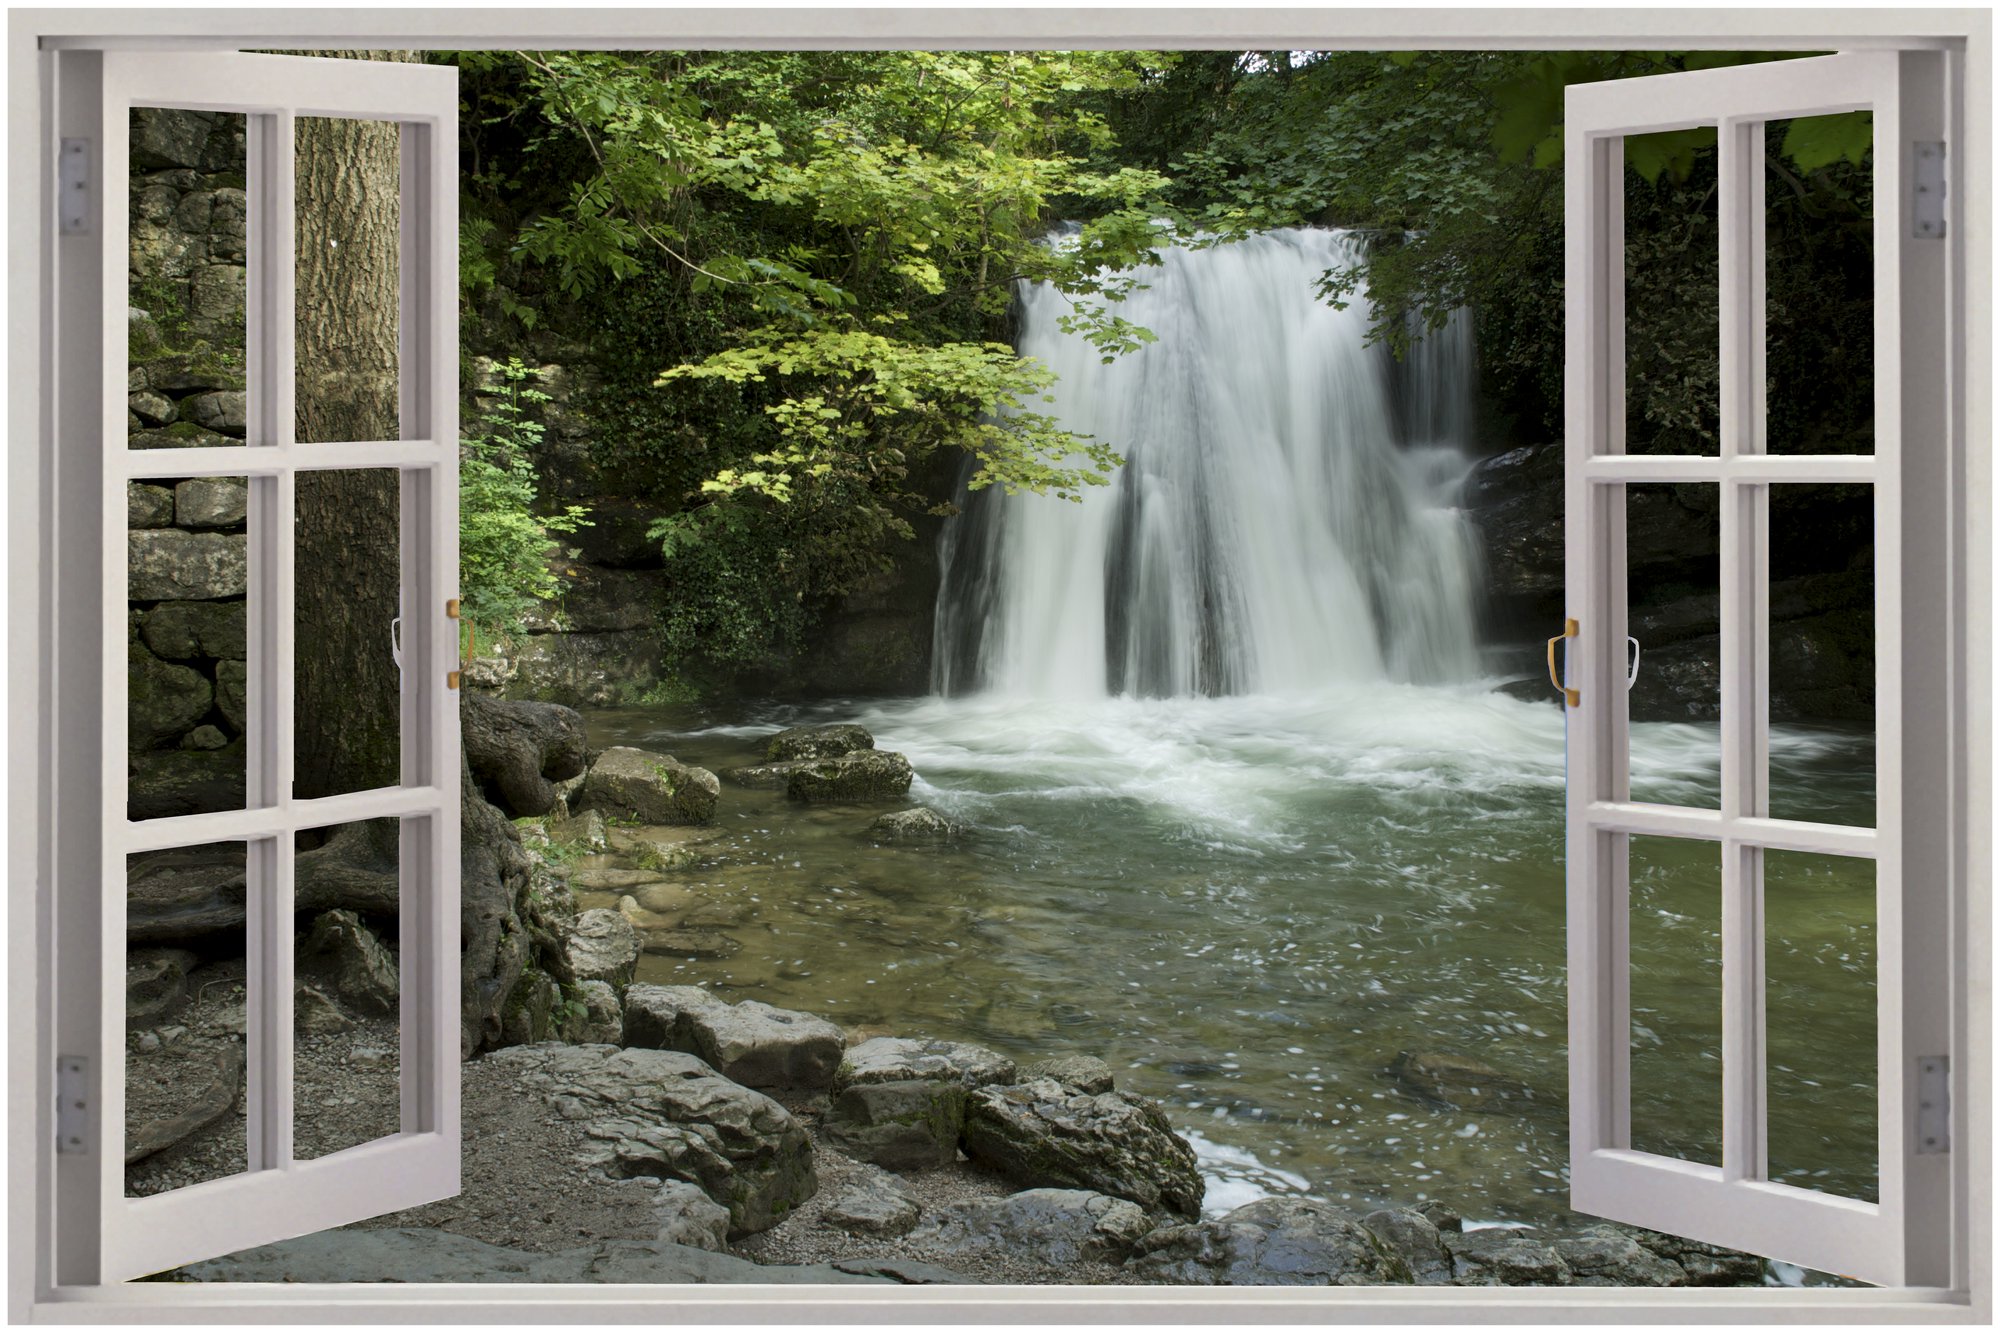 Details About Huge 3d Window Waterfall Wall Stickers Film Mural